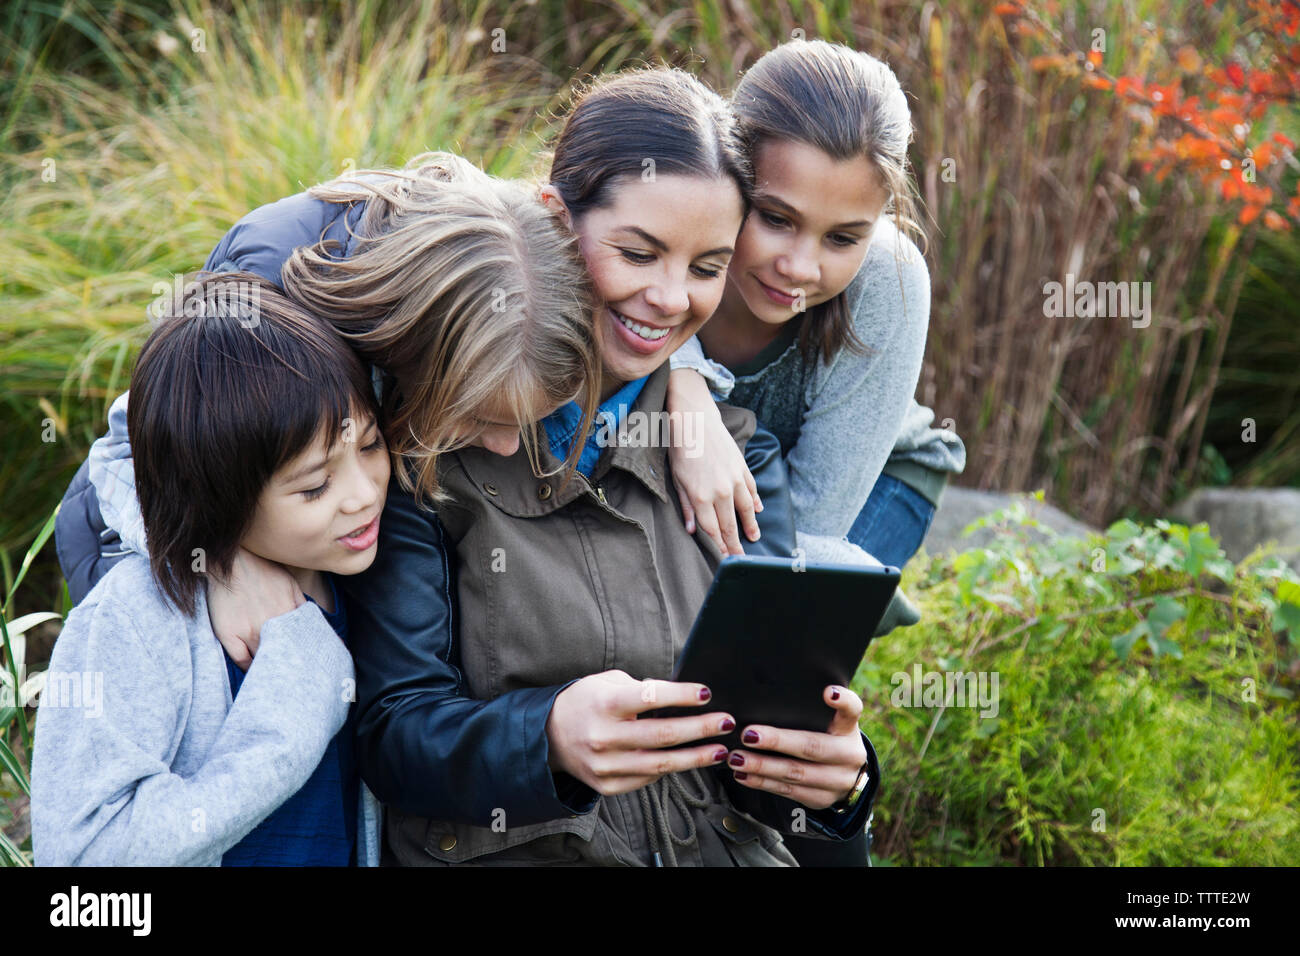 Teacher showing tablet computer to children during field trip Stock Photo